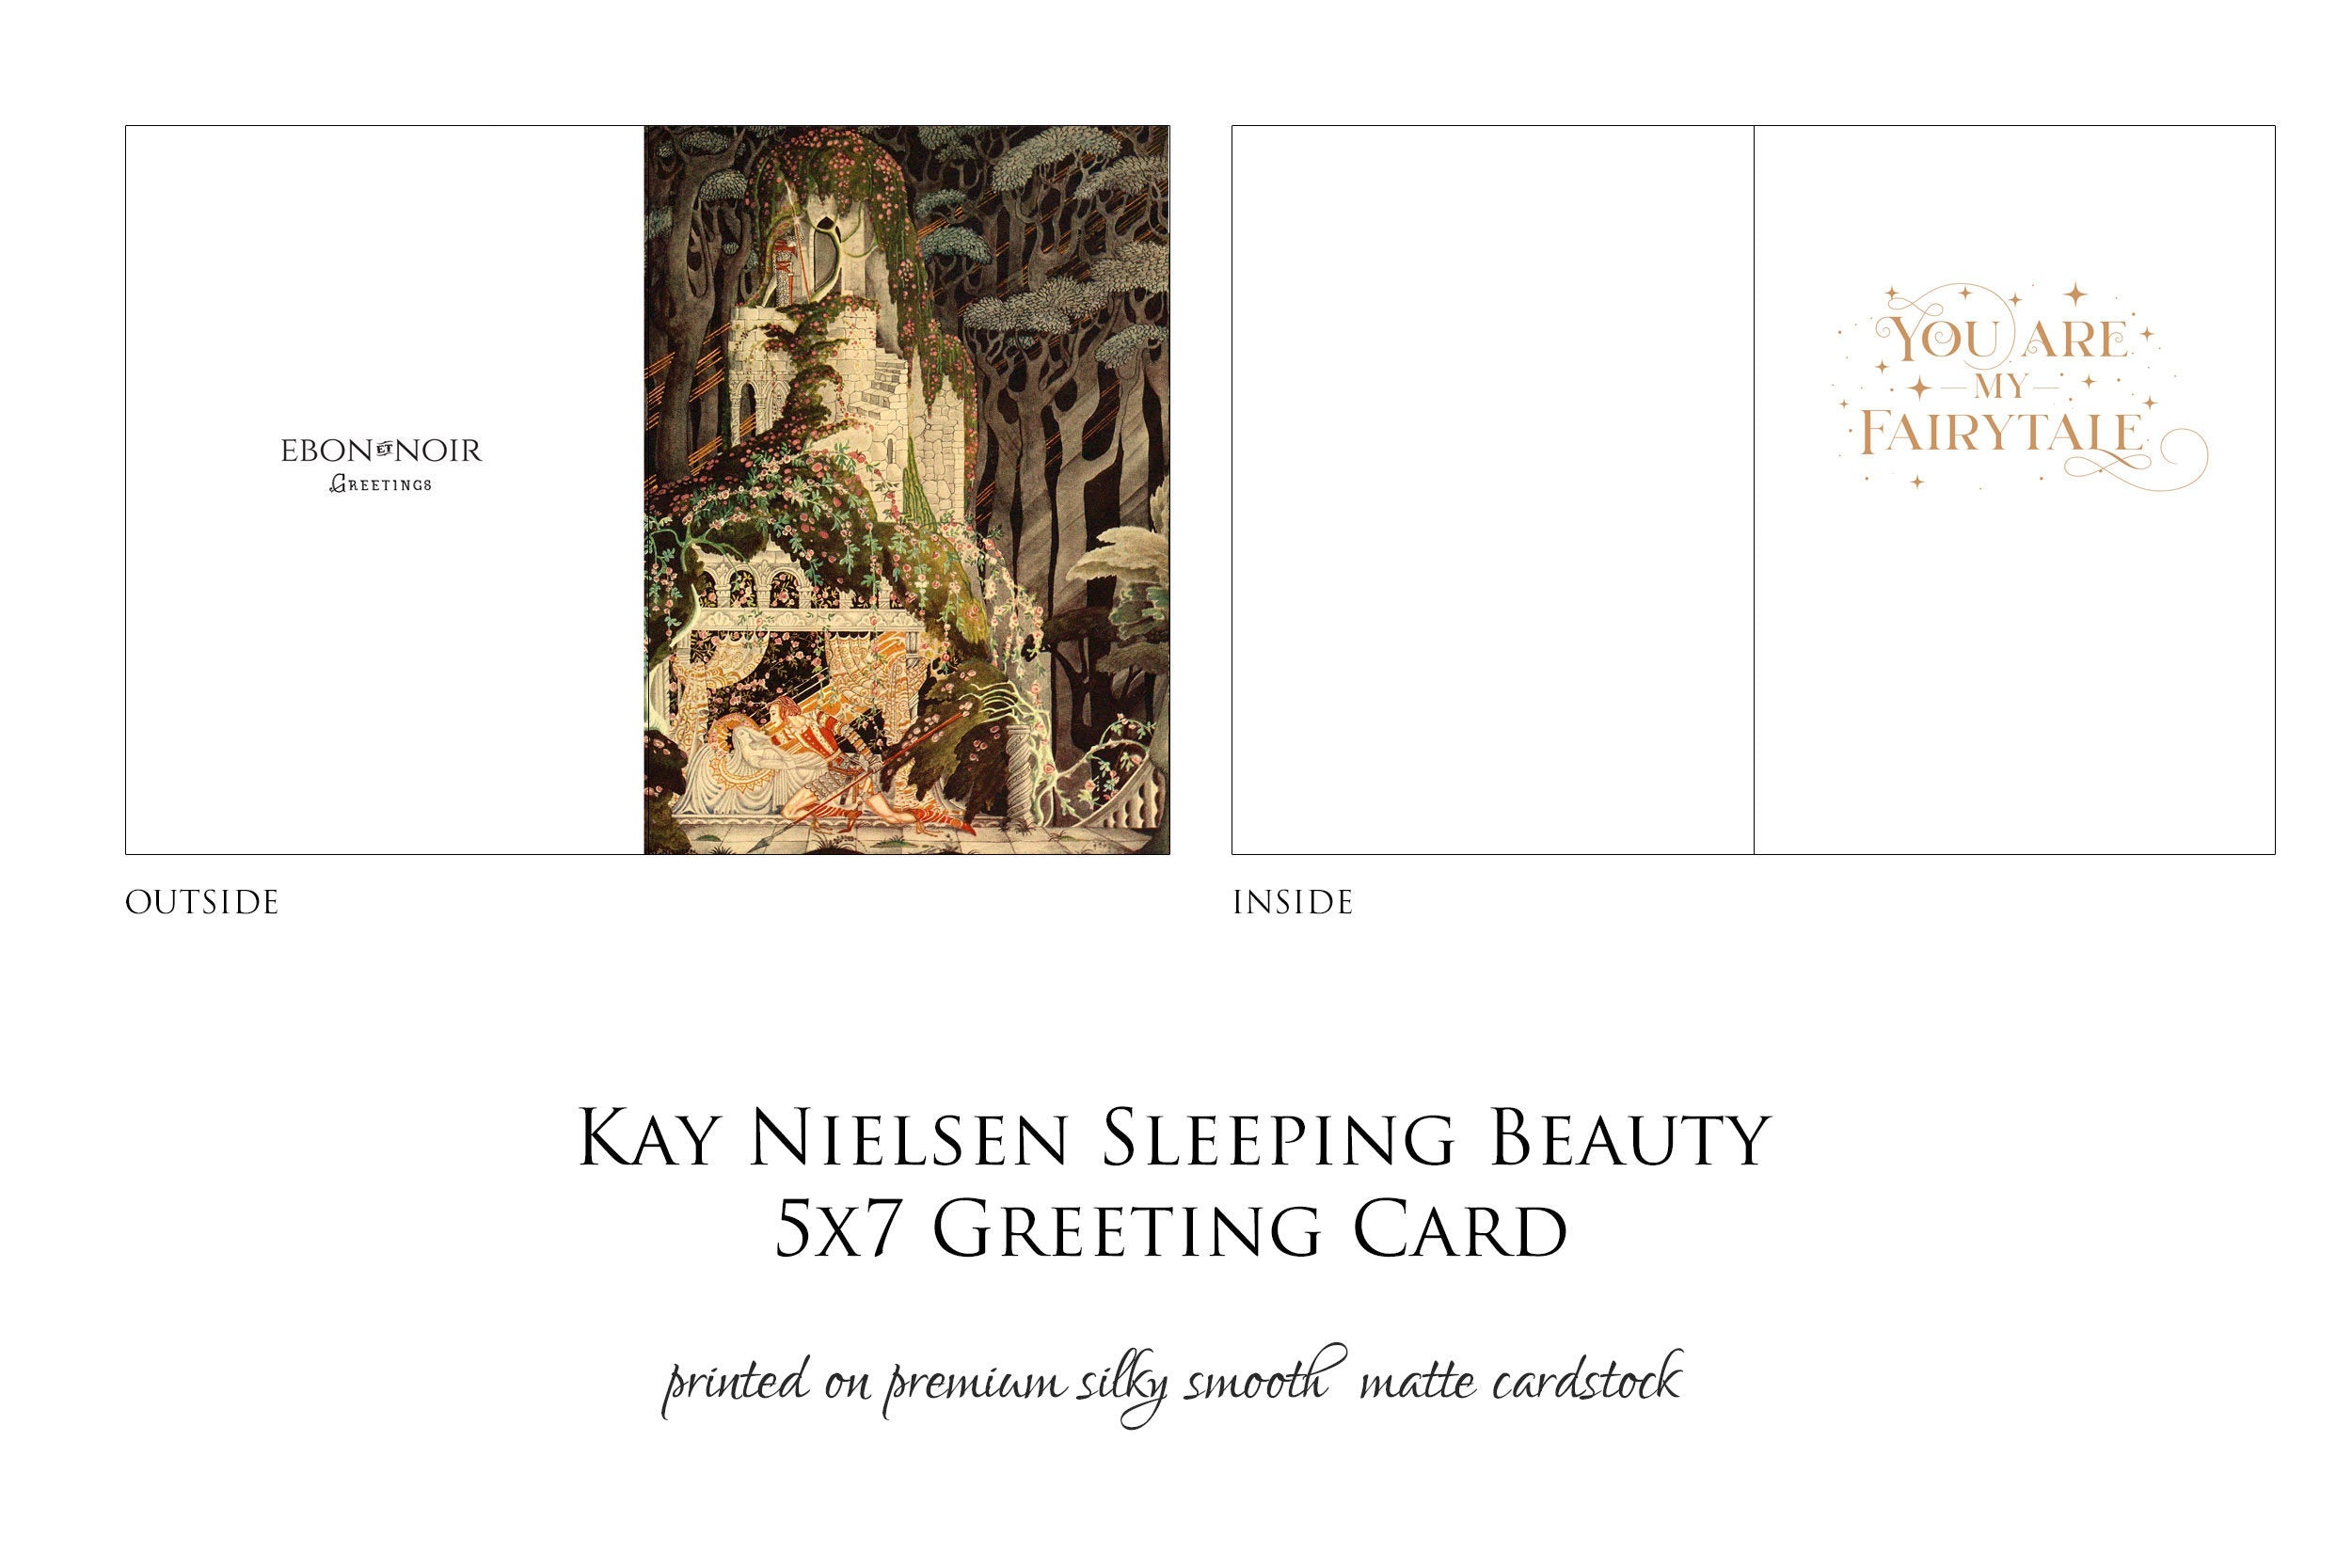 You Are My Fairytale, Sleeping Beauty, Kay Nielsen Greeting Card with Elegant Striped Gold Foil Envelope, 1 Card/Envelope